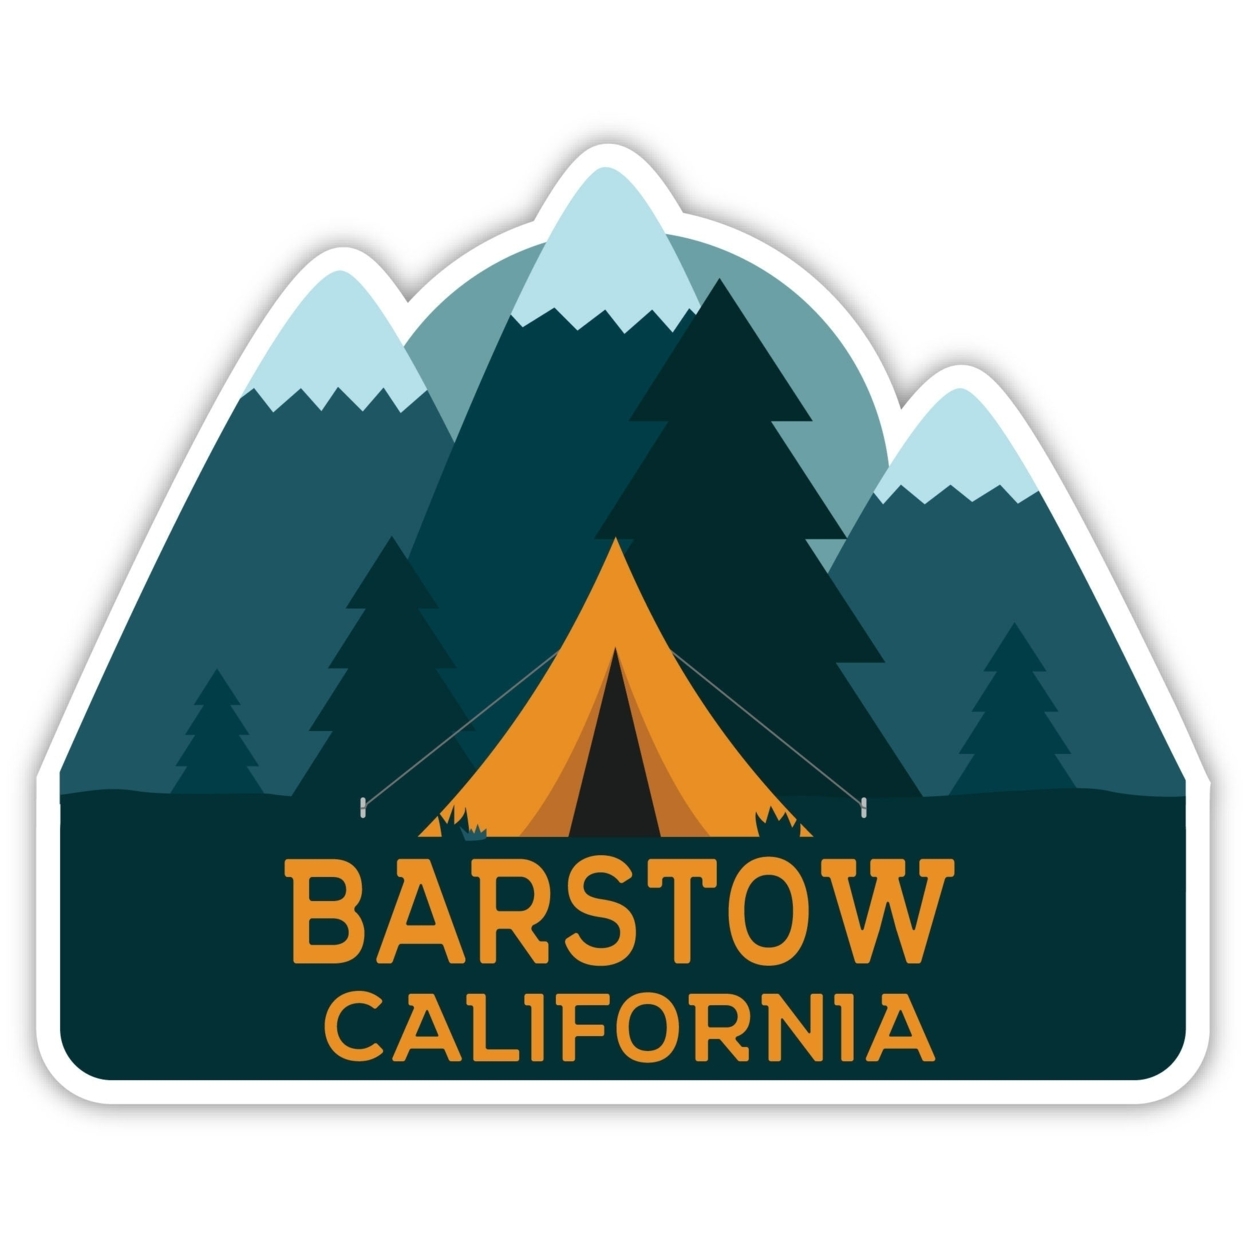 Barstow California Souvenir Decorative Stickers (Choose Theme And Size) - 4-Pack, 12-Inch, Camp Life